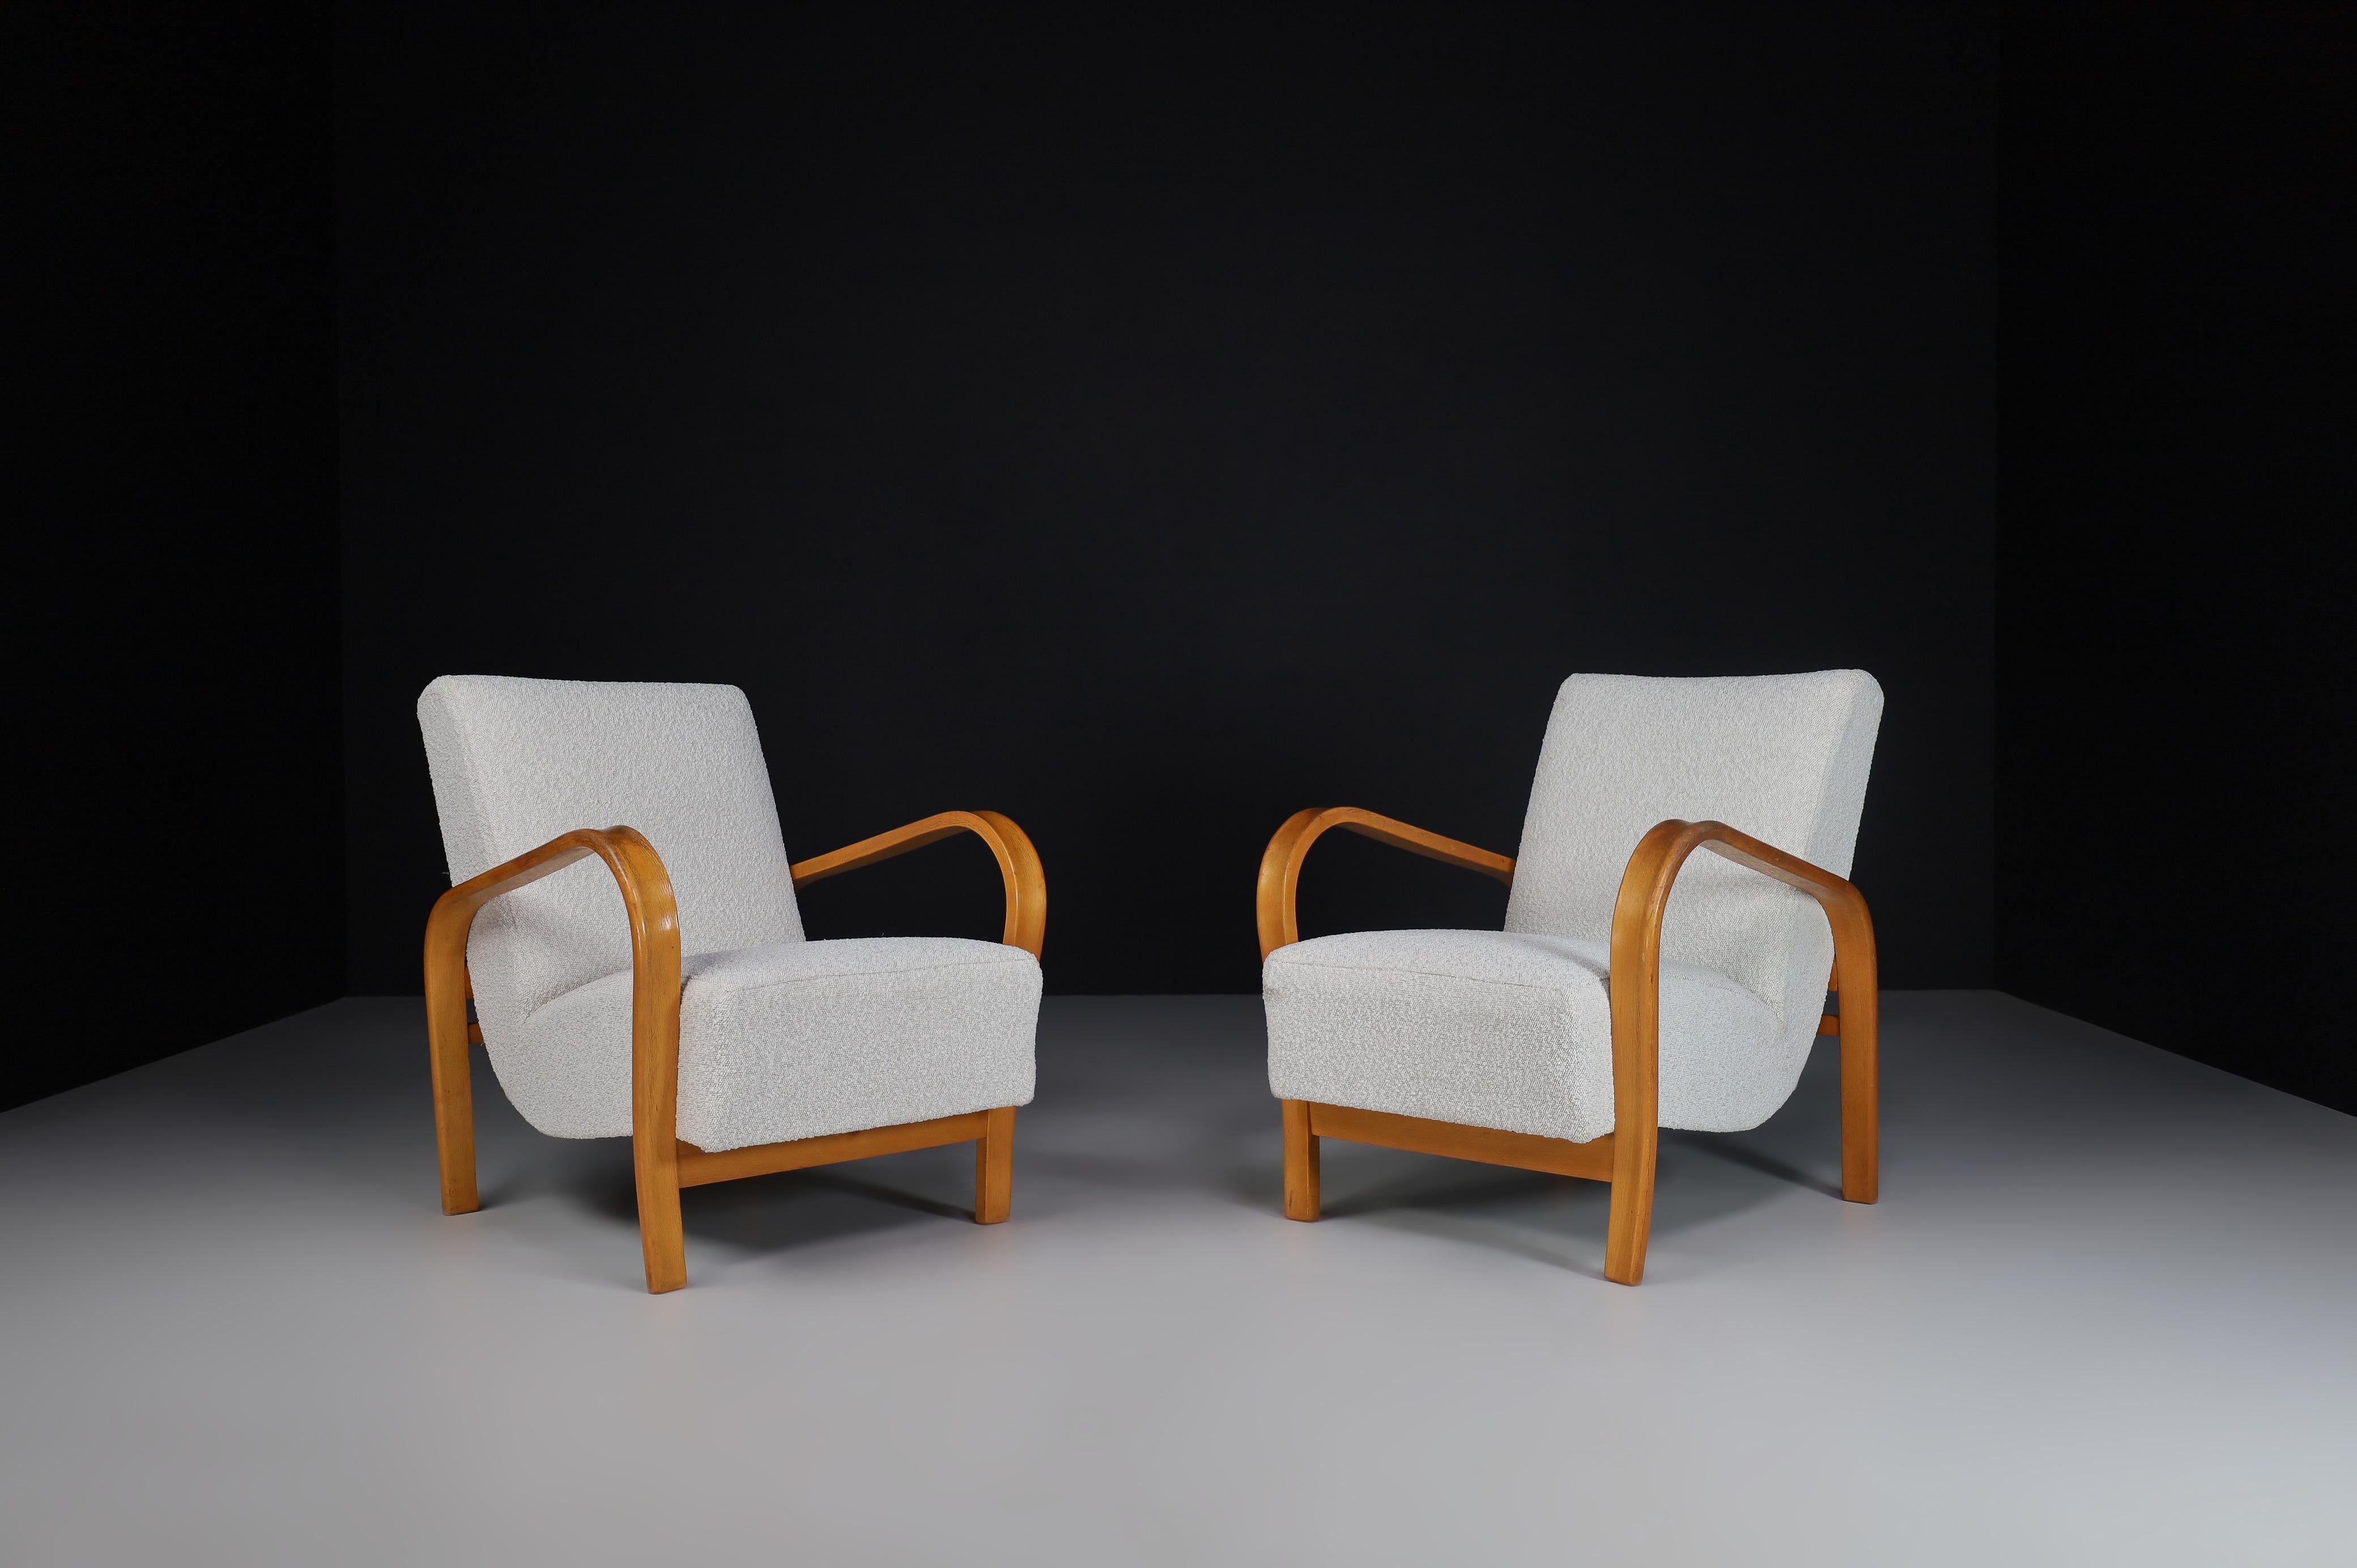 Karel Koželka & Antonín Kropáček Bentwood Armchairs.

These iconic set chairs from Czechia, circa 1940, designed by By Karel Koželka & Antonín Kropáček, are a benchmark for midcentury design in Central Europe. A simple and elegant geometry contrasts